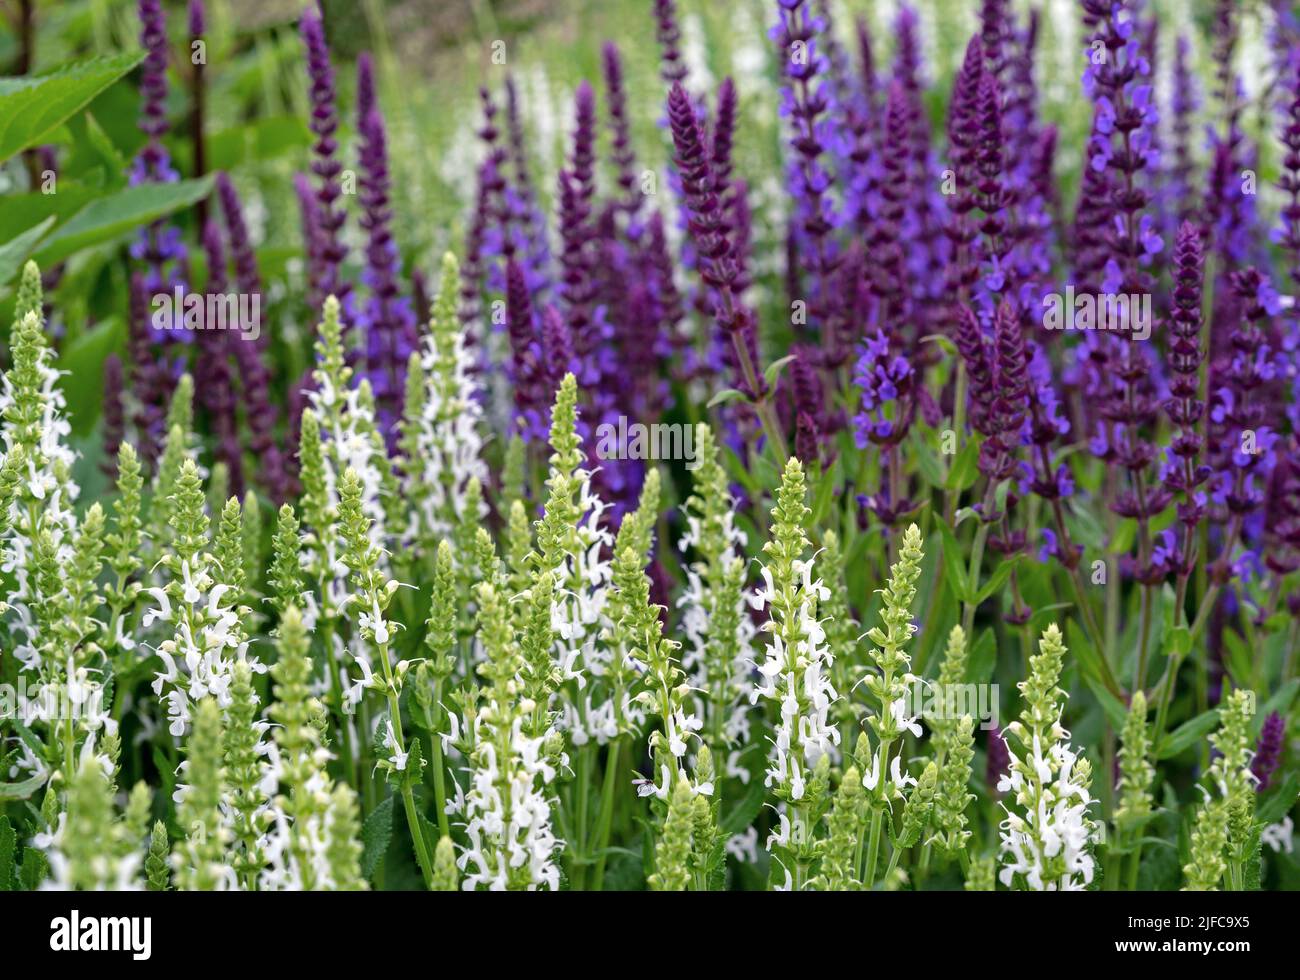 Purple and white sage flowers. Perennial sage (Salvia nemorosa) is a medicinal plant and food spice. Stock Photo